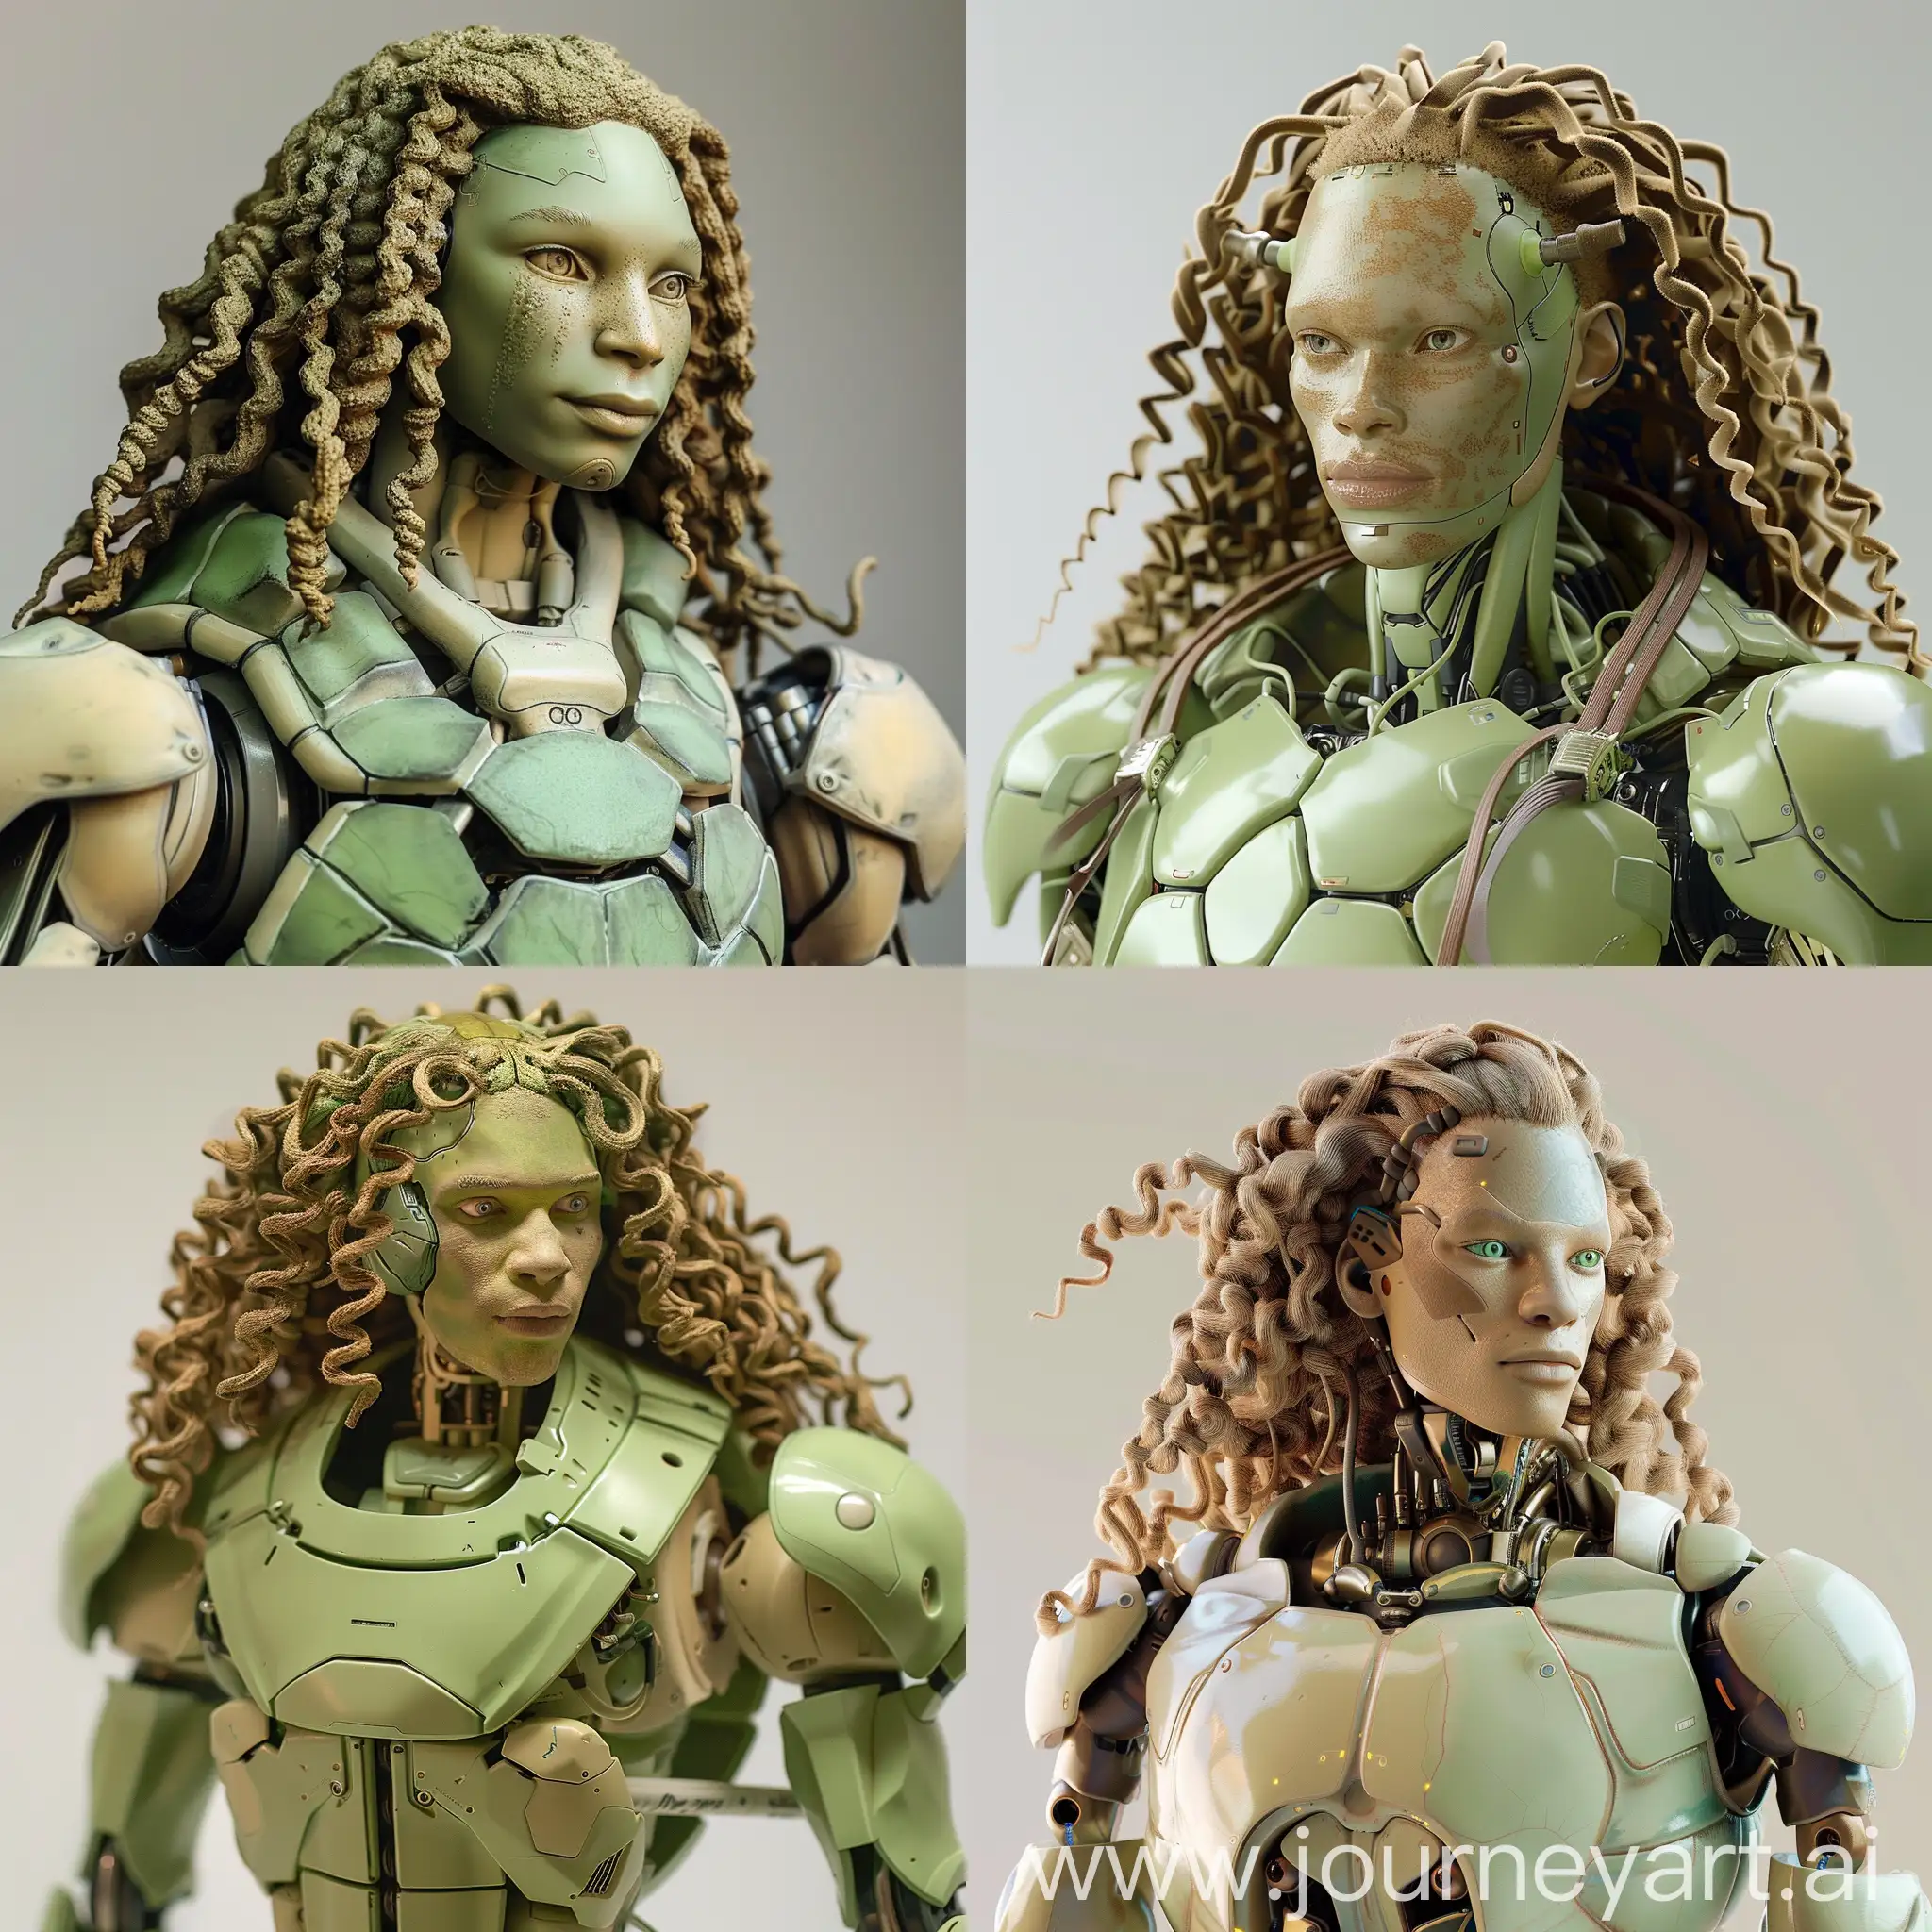 Whimsical-TurtleThemed-Human-Robot-with-Voluminous-Curly-Hair